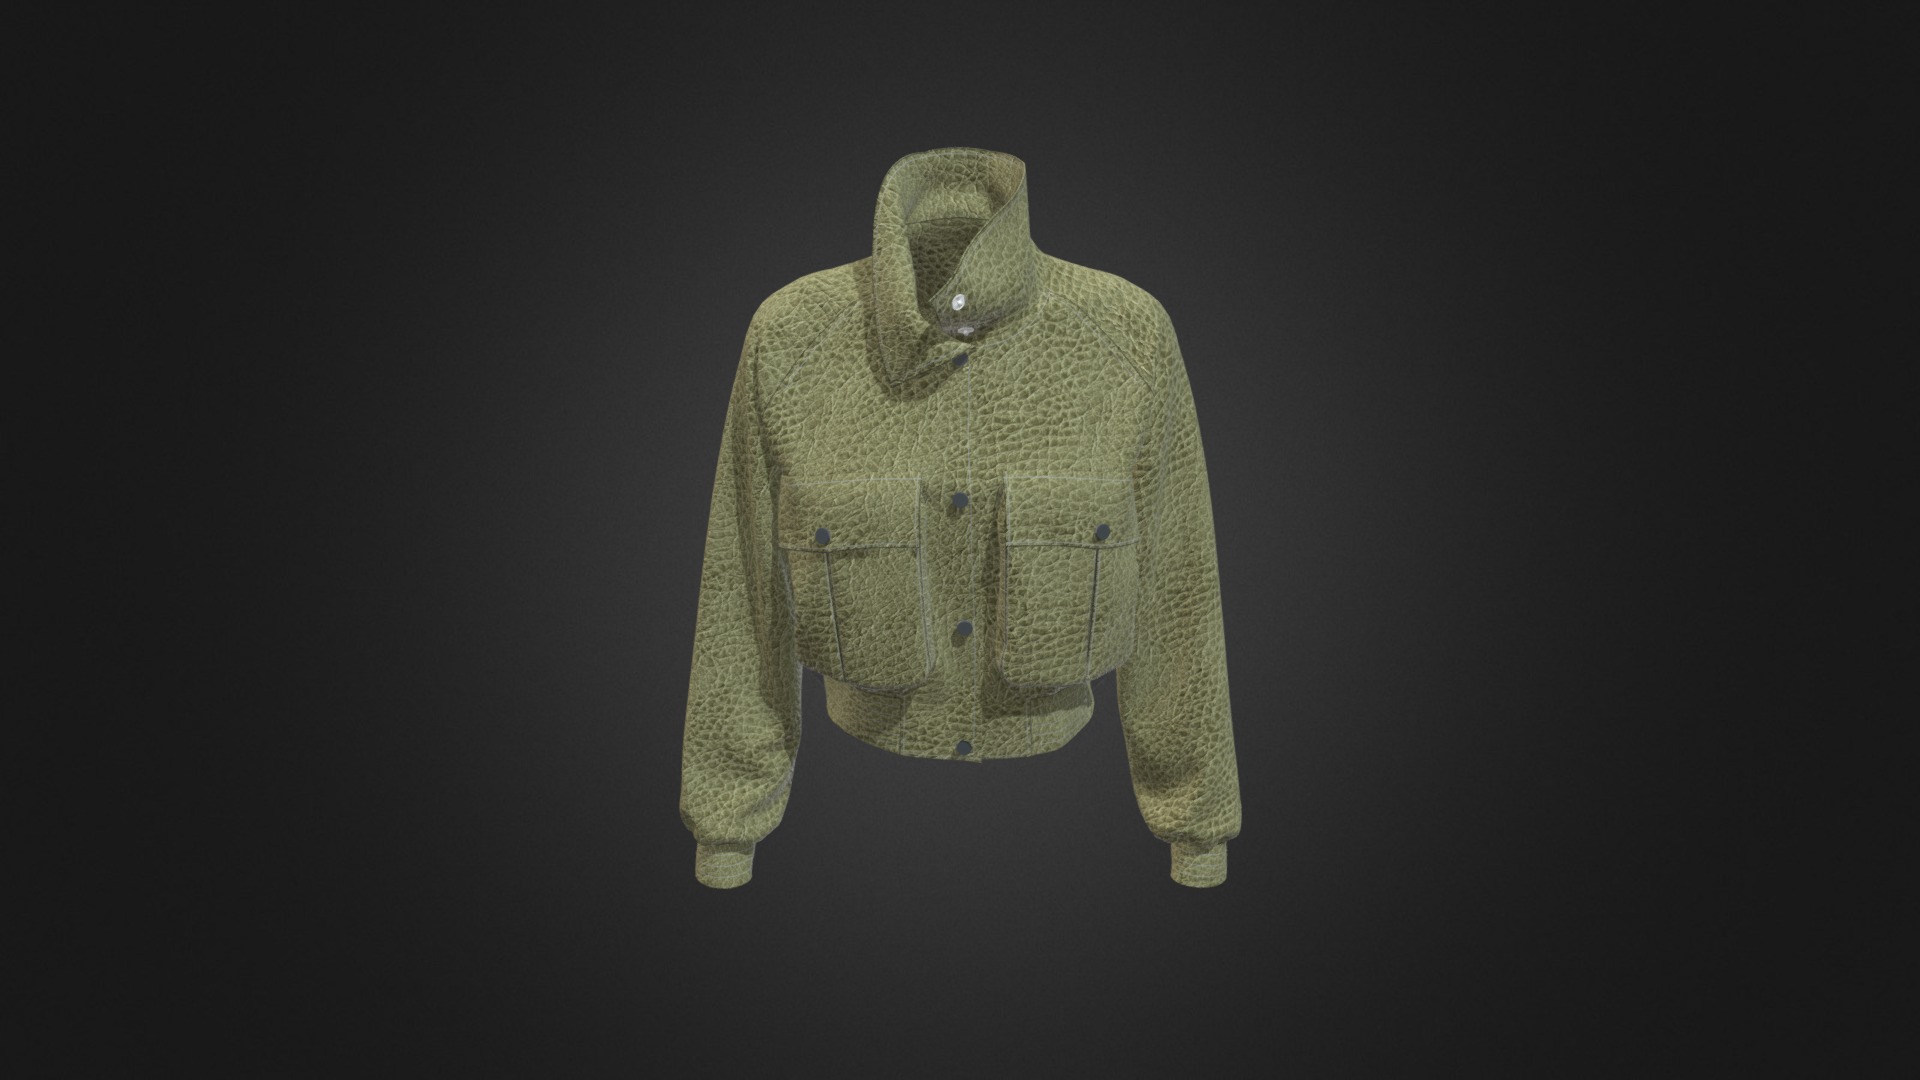 3D model Women Military Raglan Jumper - This is a 3D model of the Women Military Raglan Jumper. The 3D model is about a green jacket on a black background.